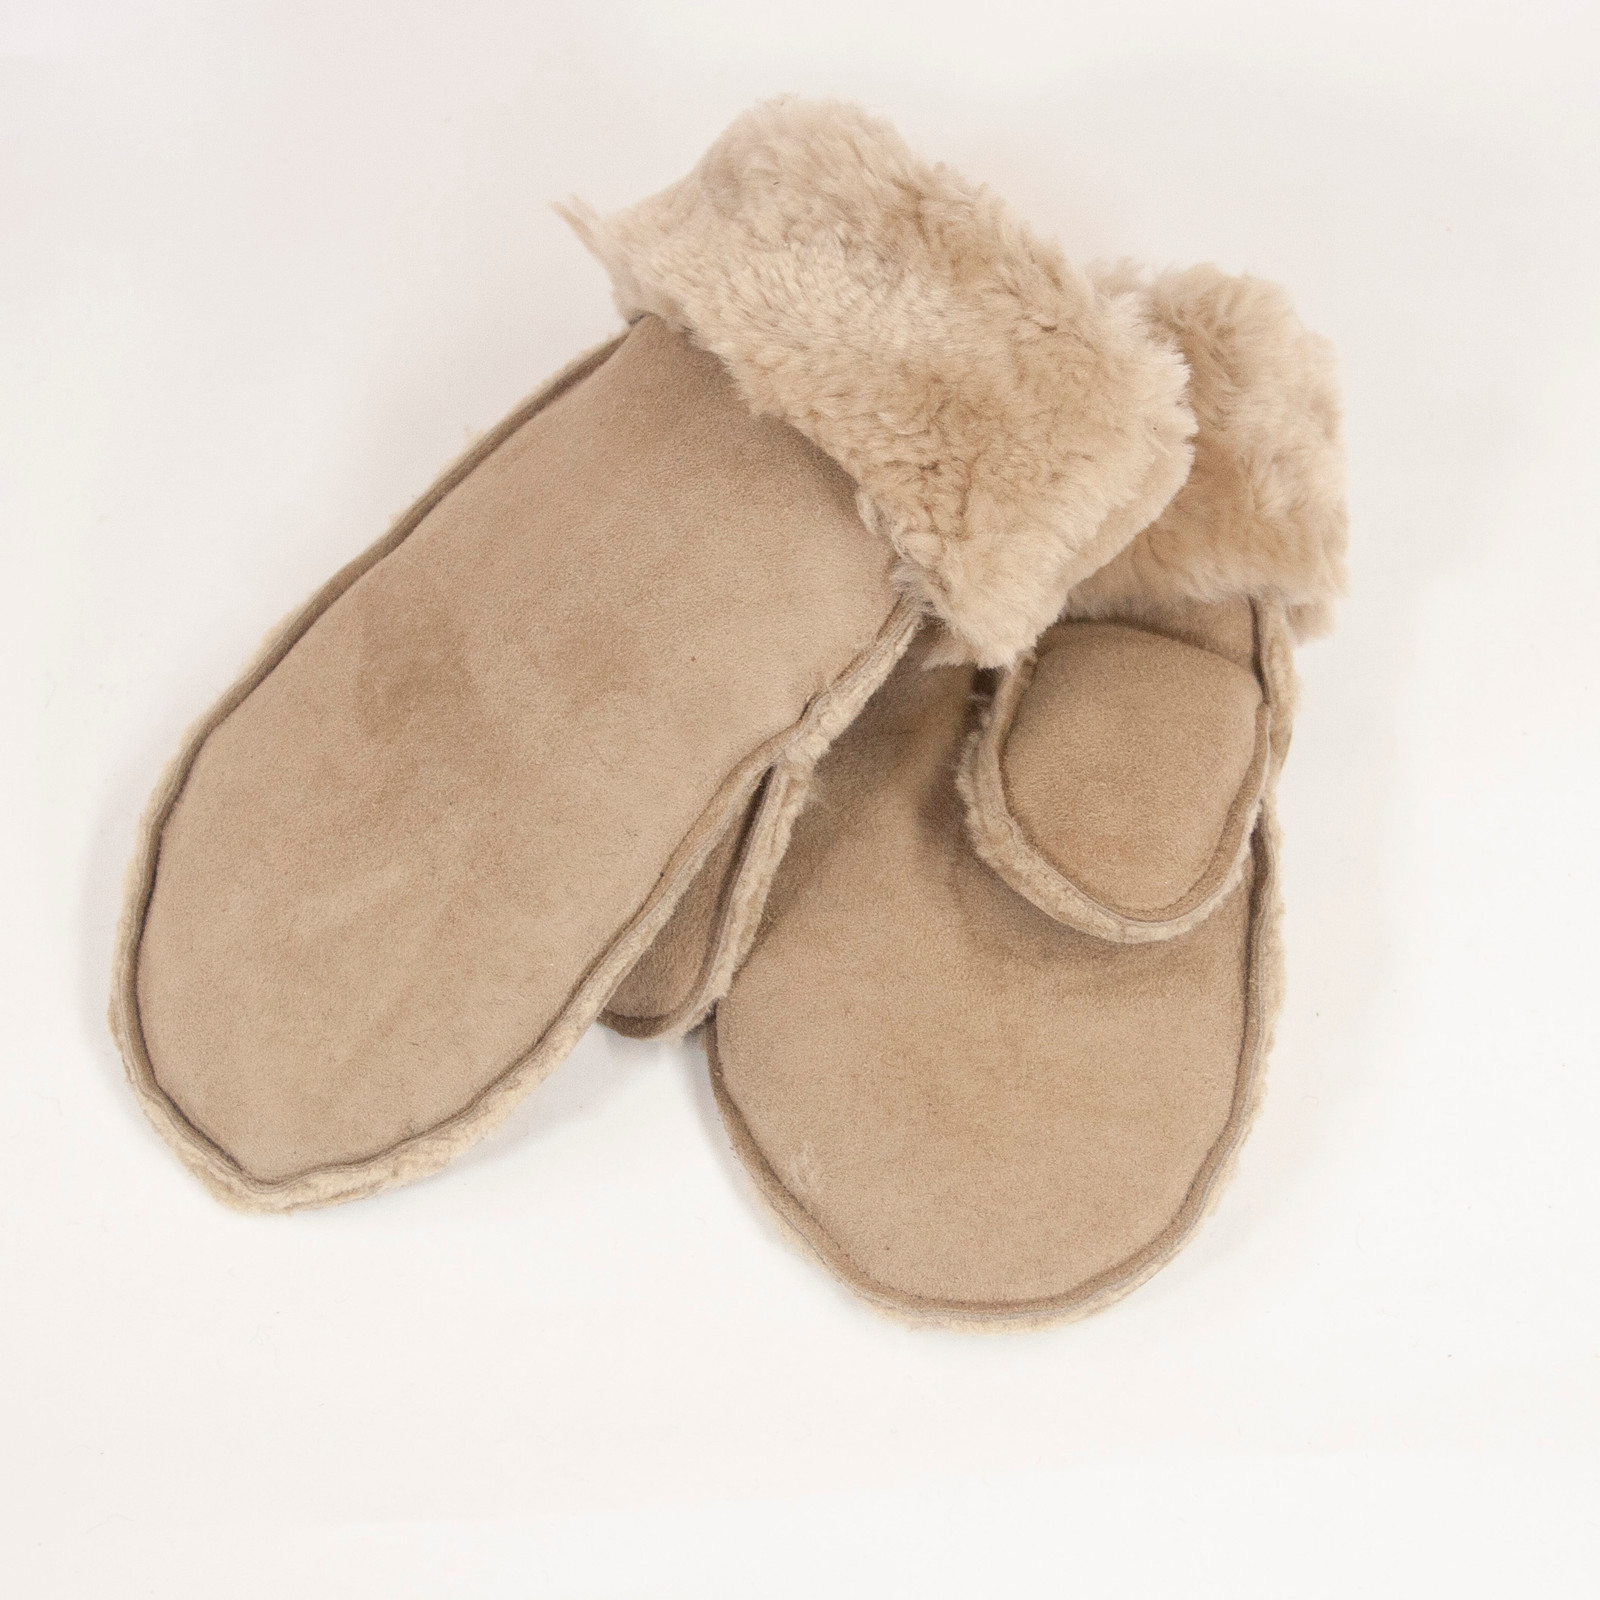 Shearling Mittens - Taupe Shearling